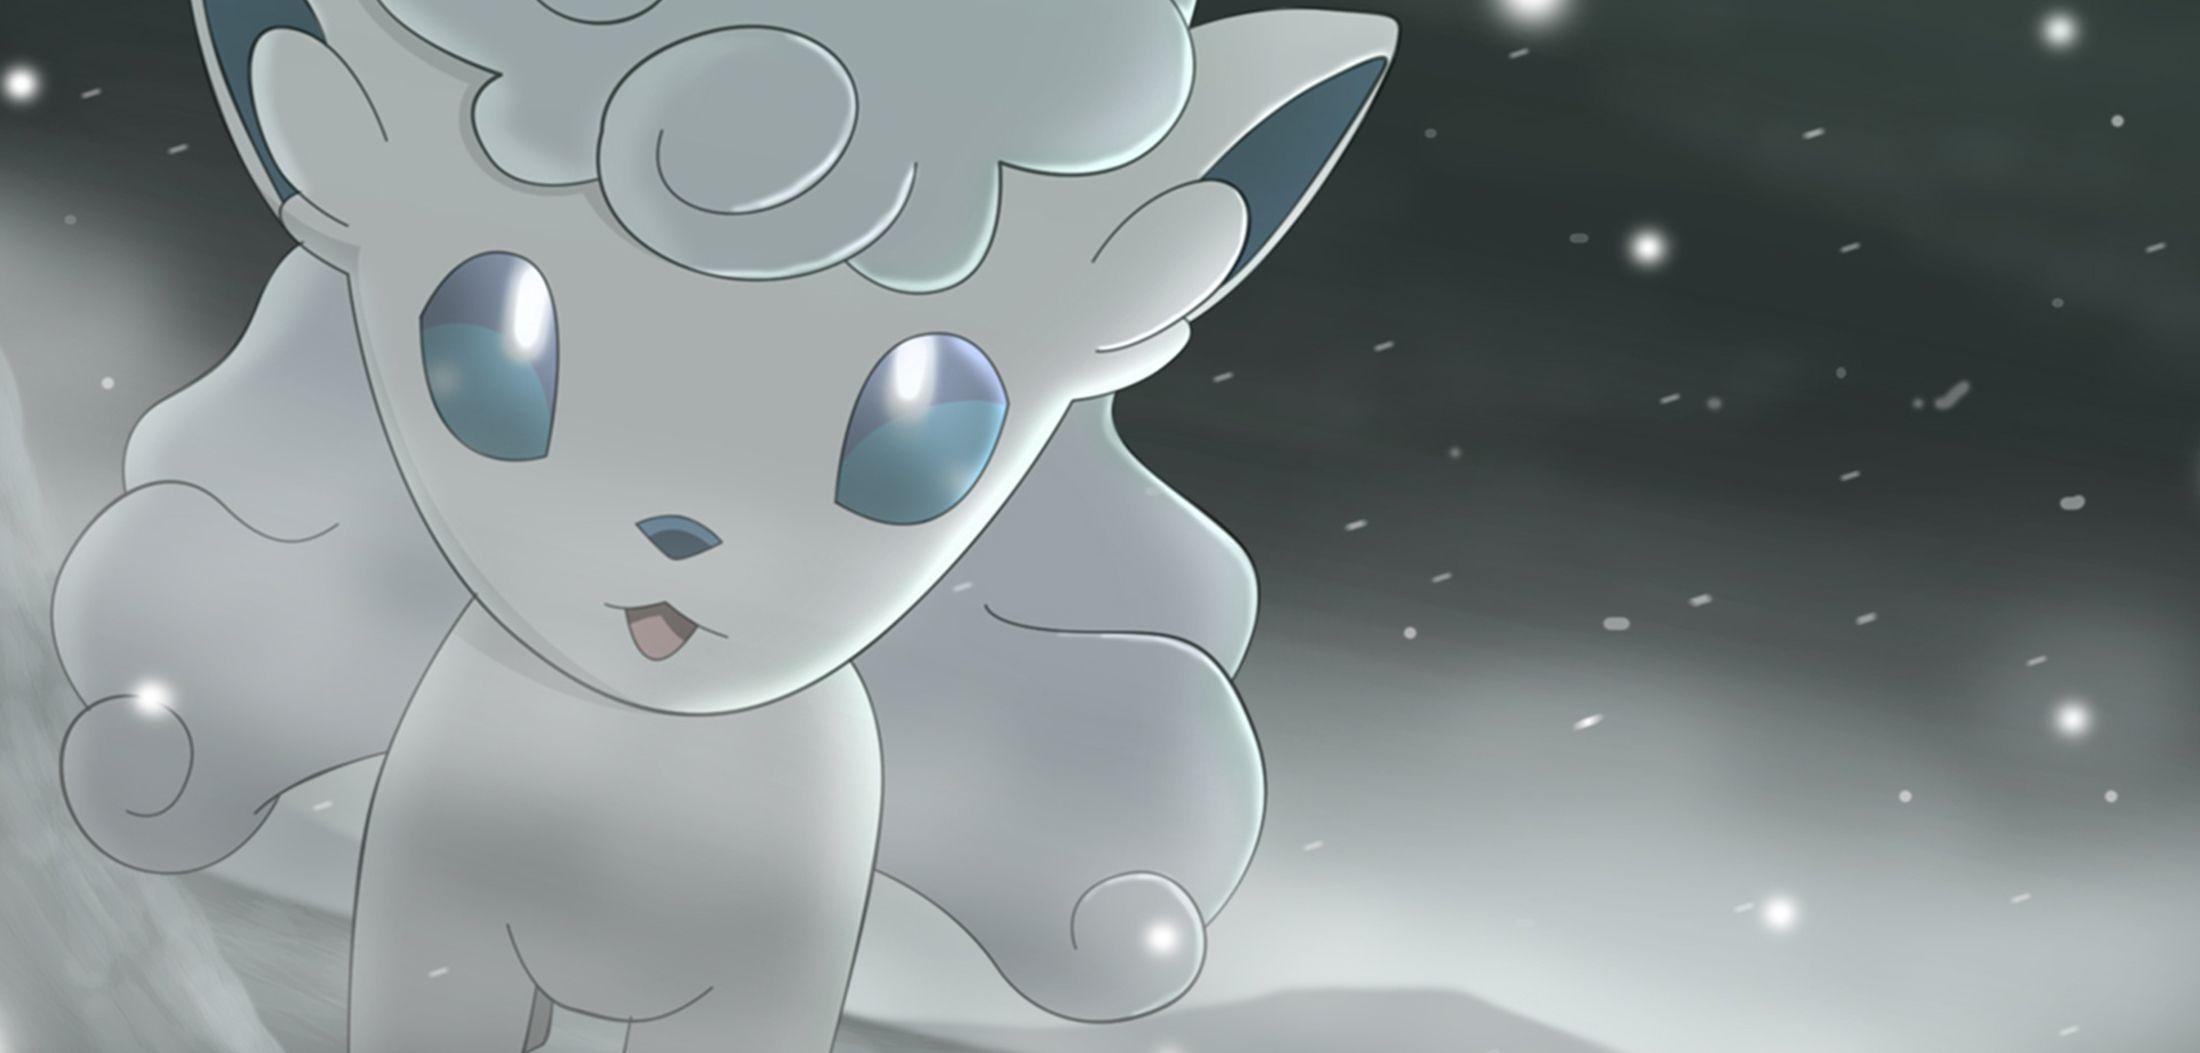 Pokémon Images Vulpix Wallpaper And Background Photos  Pokemon Vulpiks  Transparent PNG  431x415  Free Download on NicePNG